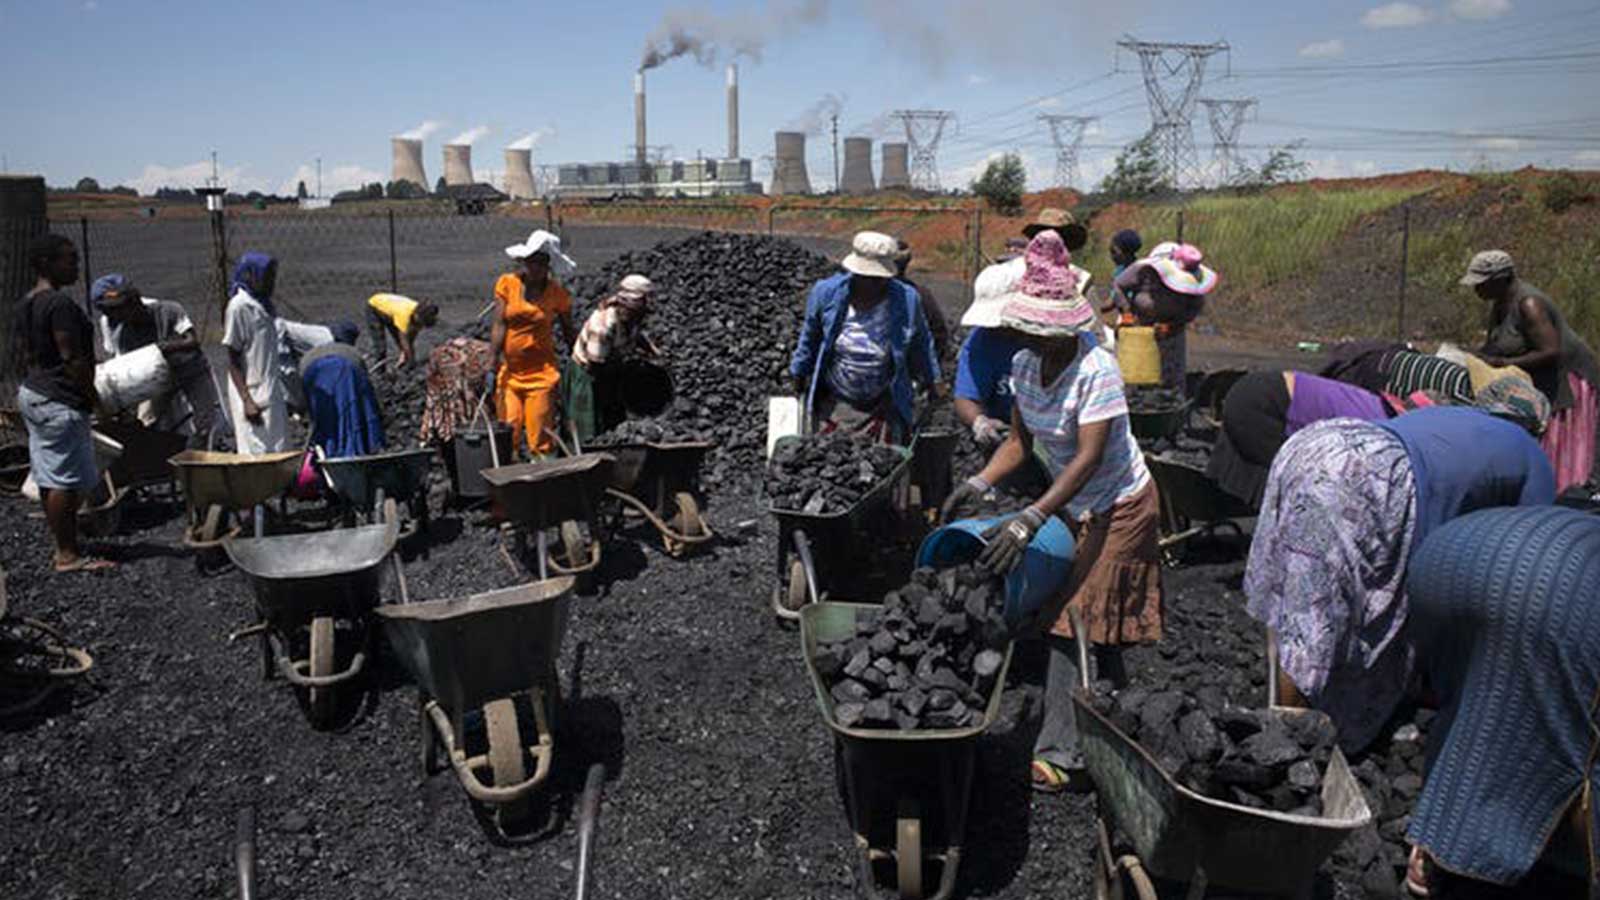 Women in South Africa fill wheelbarrows with free coal